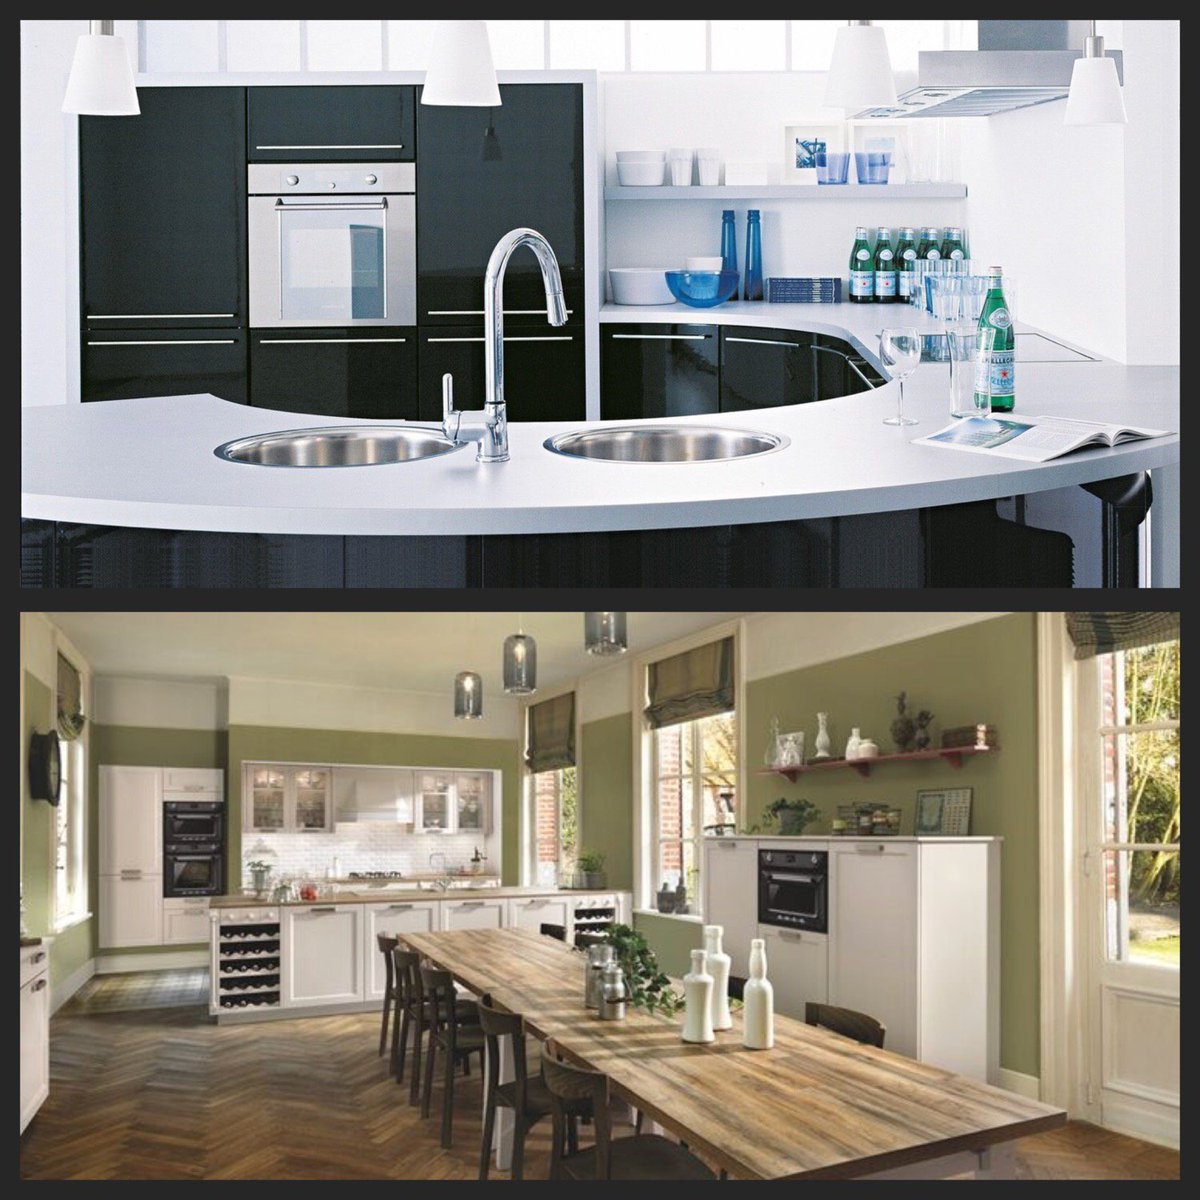 Which would you choose; modern or classic? #modernkitchen #classickitchen